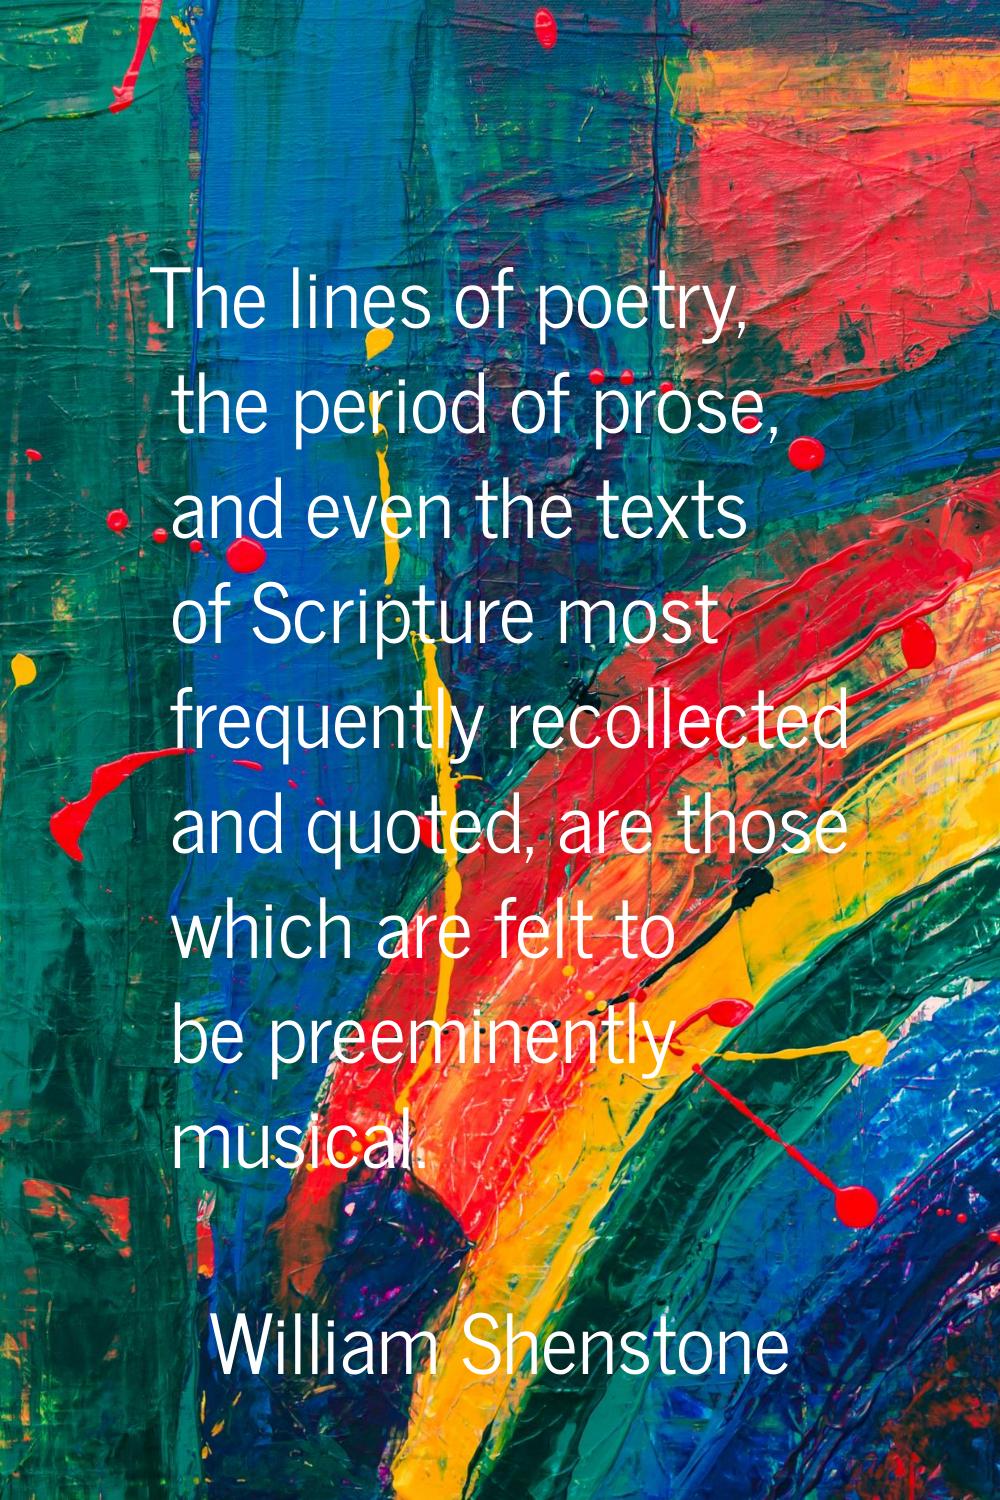 The lines of poetry, the period of prose, and even the texts of Scripture most frequently recollect